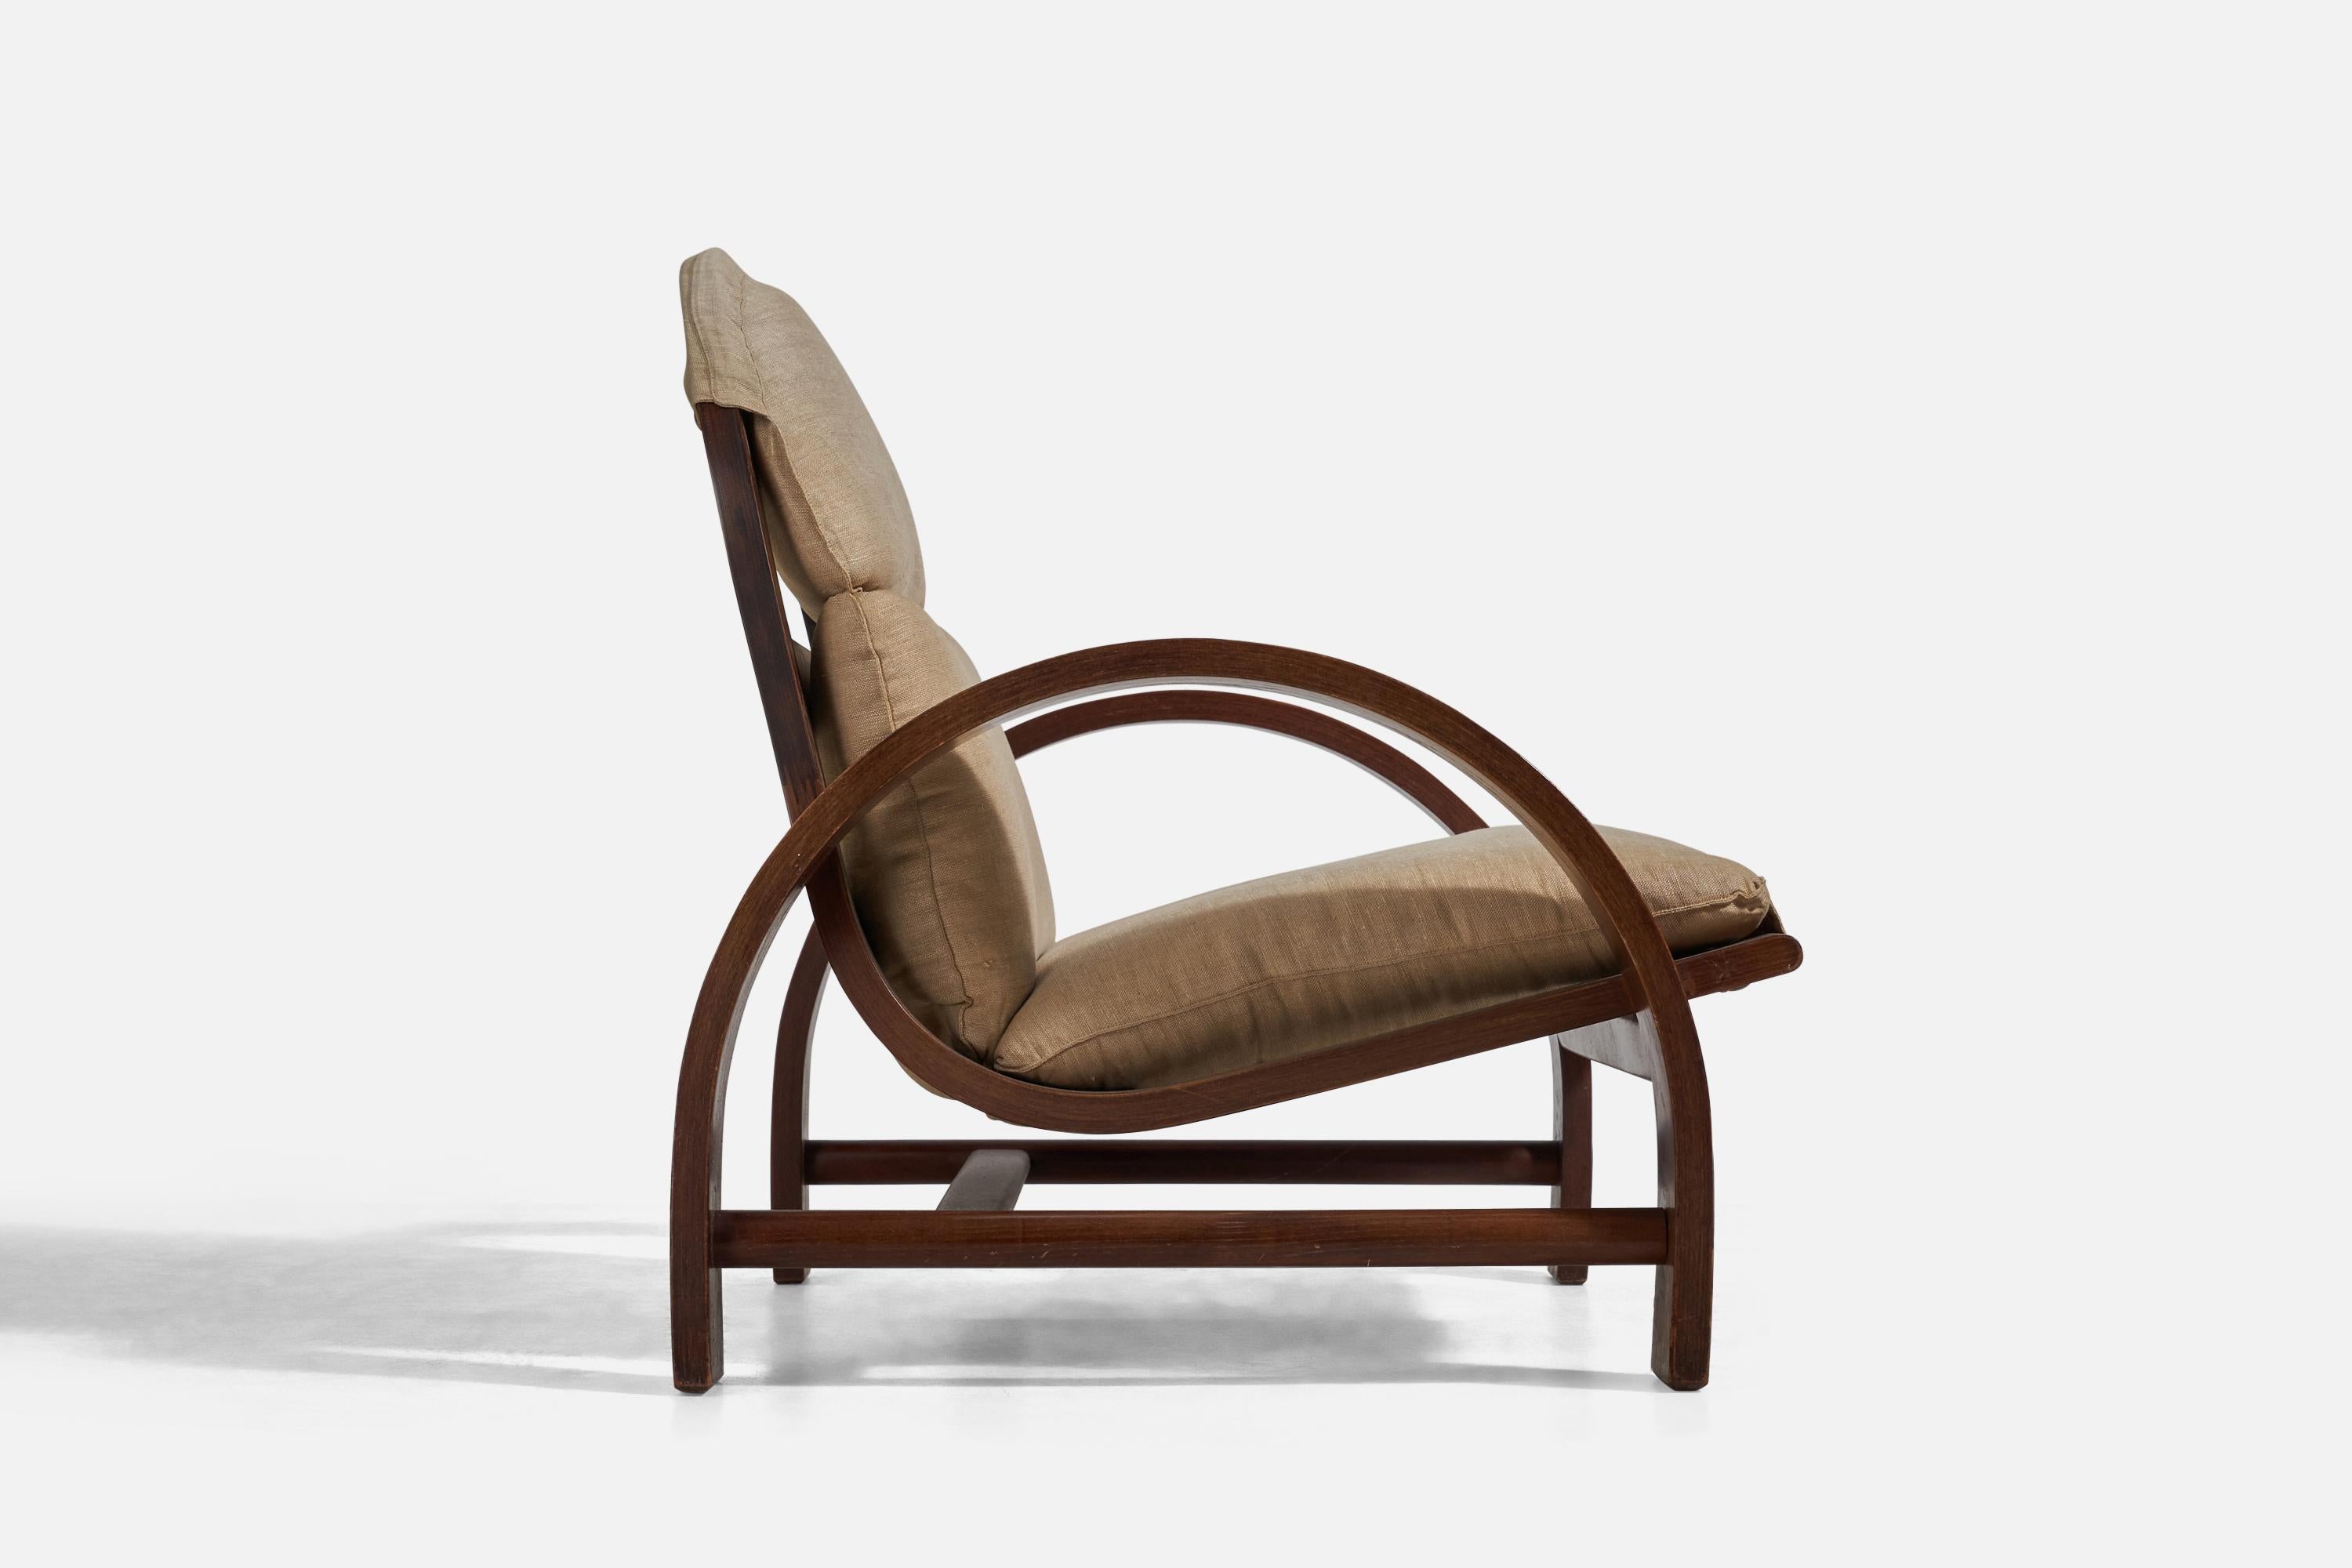 Adalberto Dal Lago, Lounge Chair, Ed. Germa, Ash Wood, Fabric, Italy, 1974 In Good Condition For Sale In High Point, NC